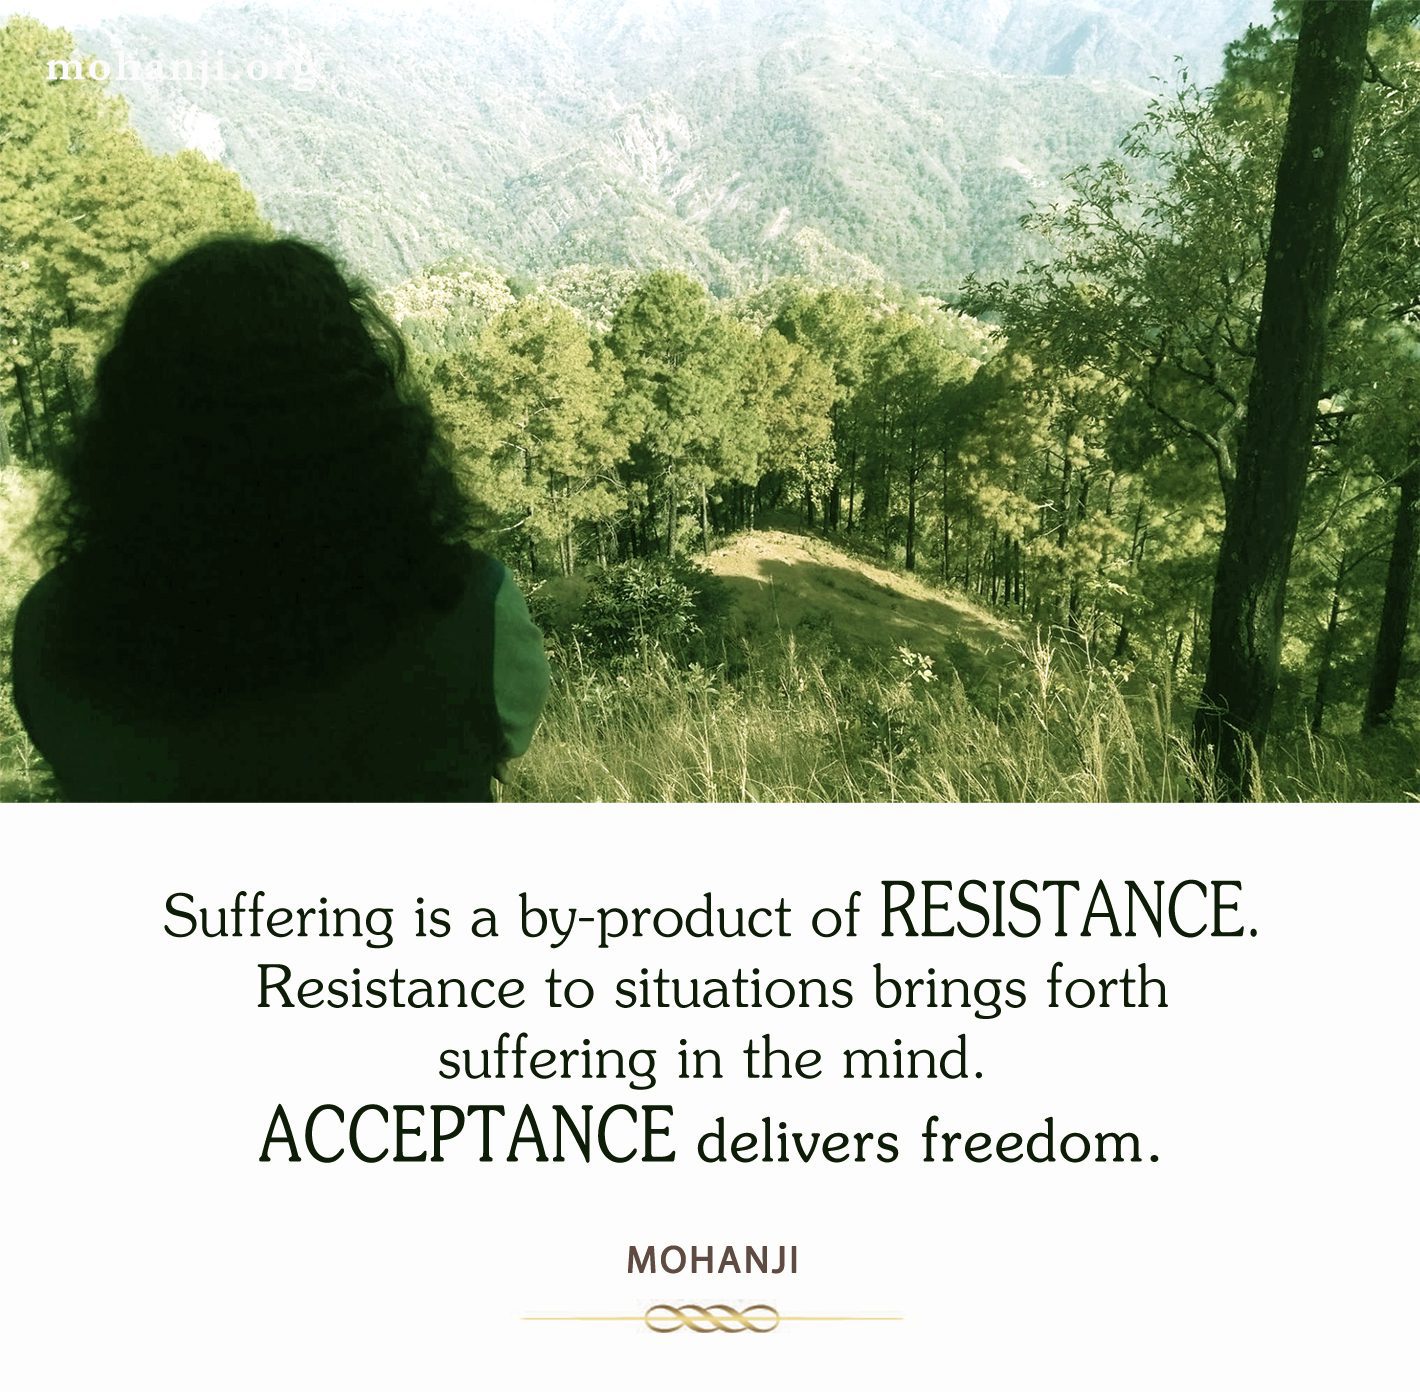 Mohanji quote - Suffering is a byproduct of resistance 2